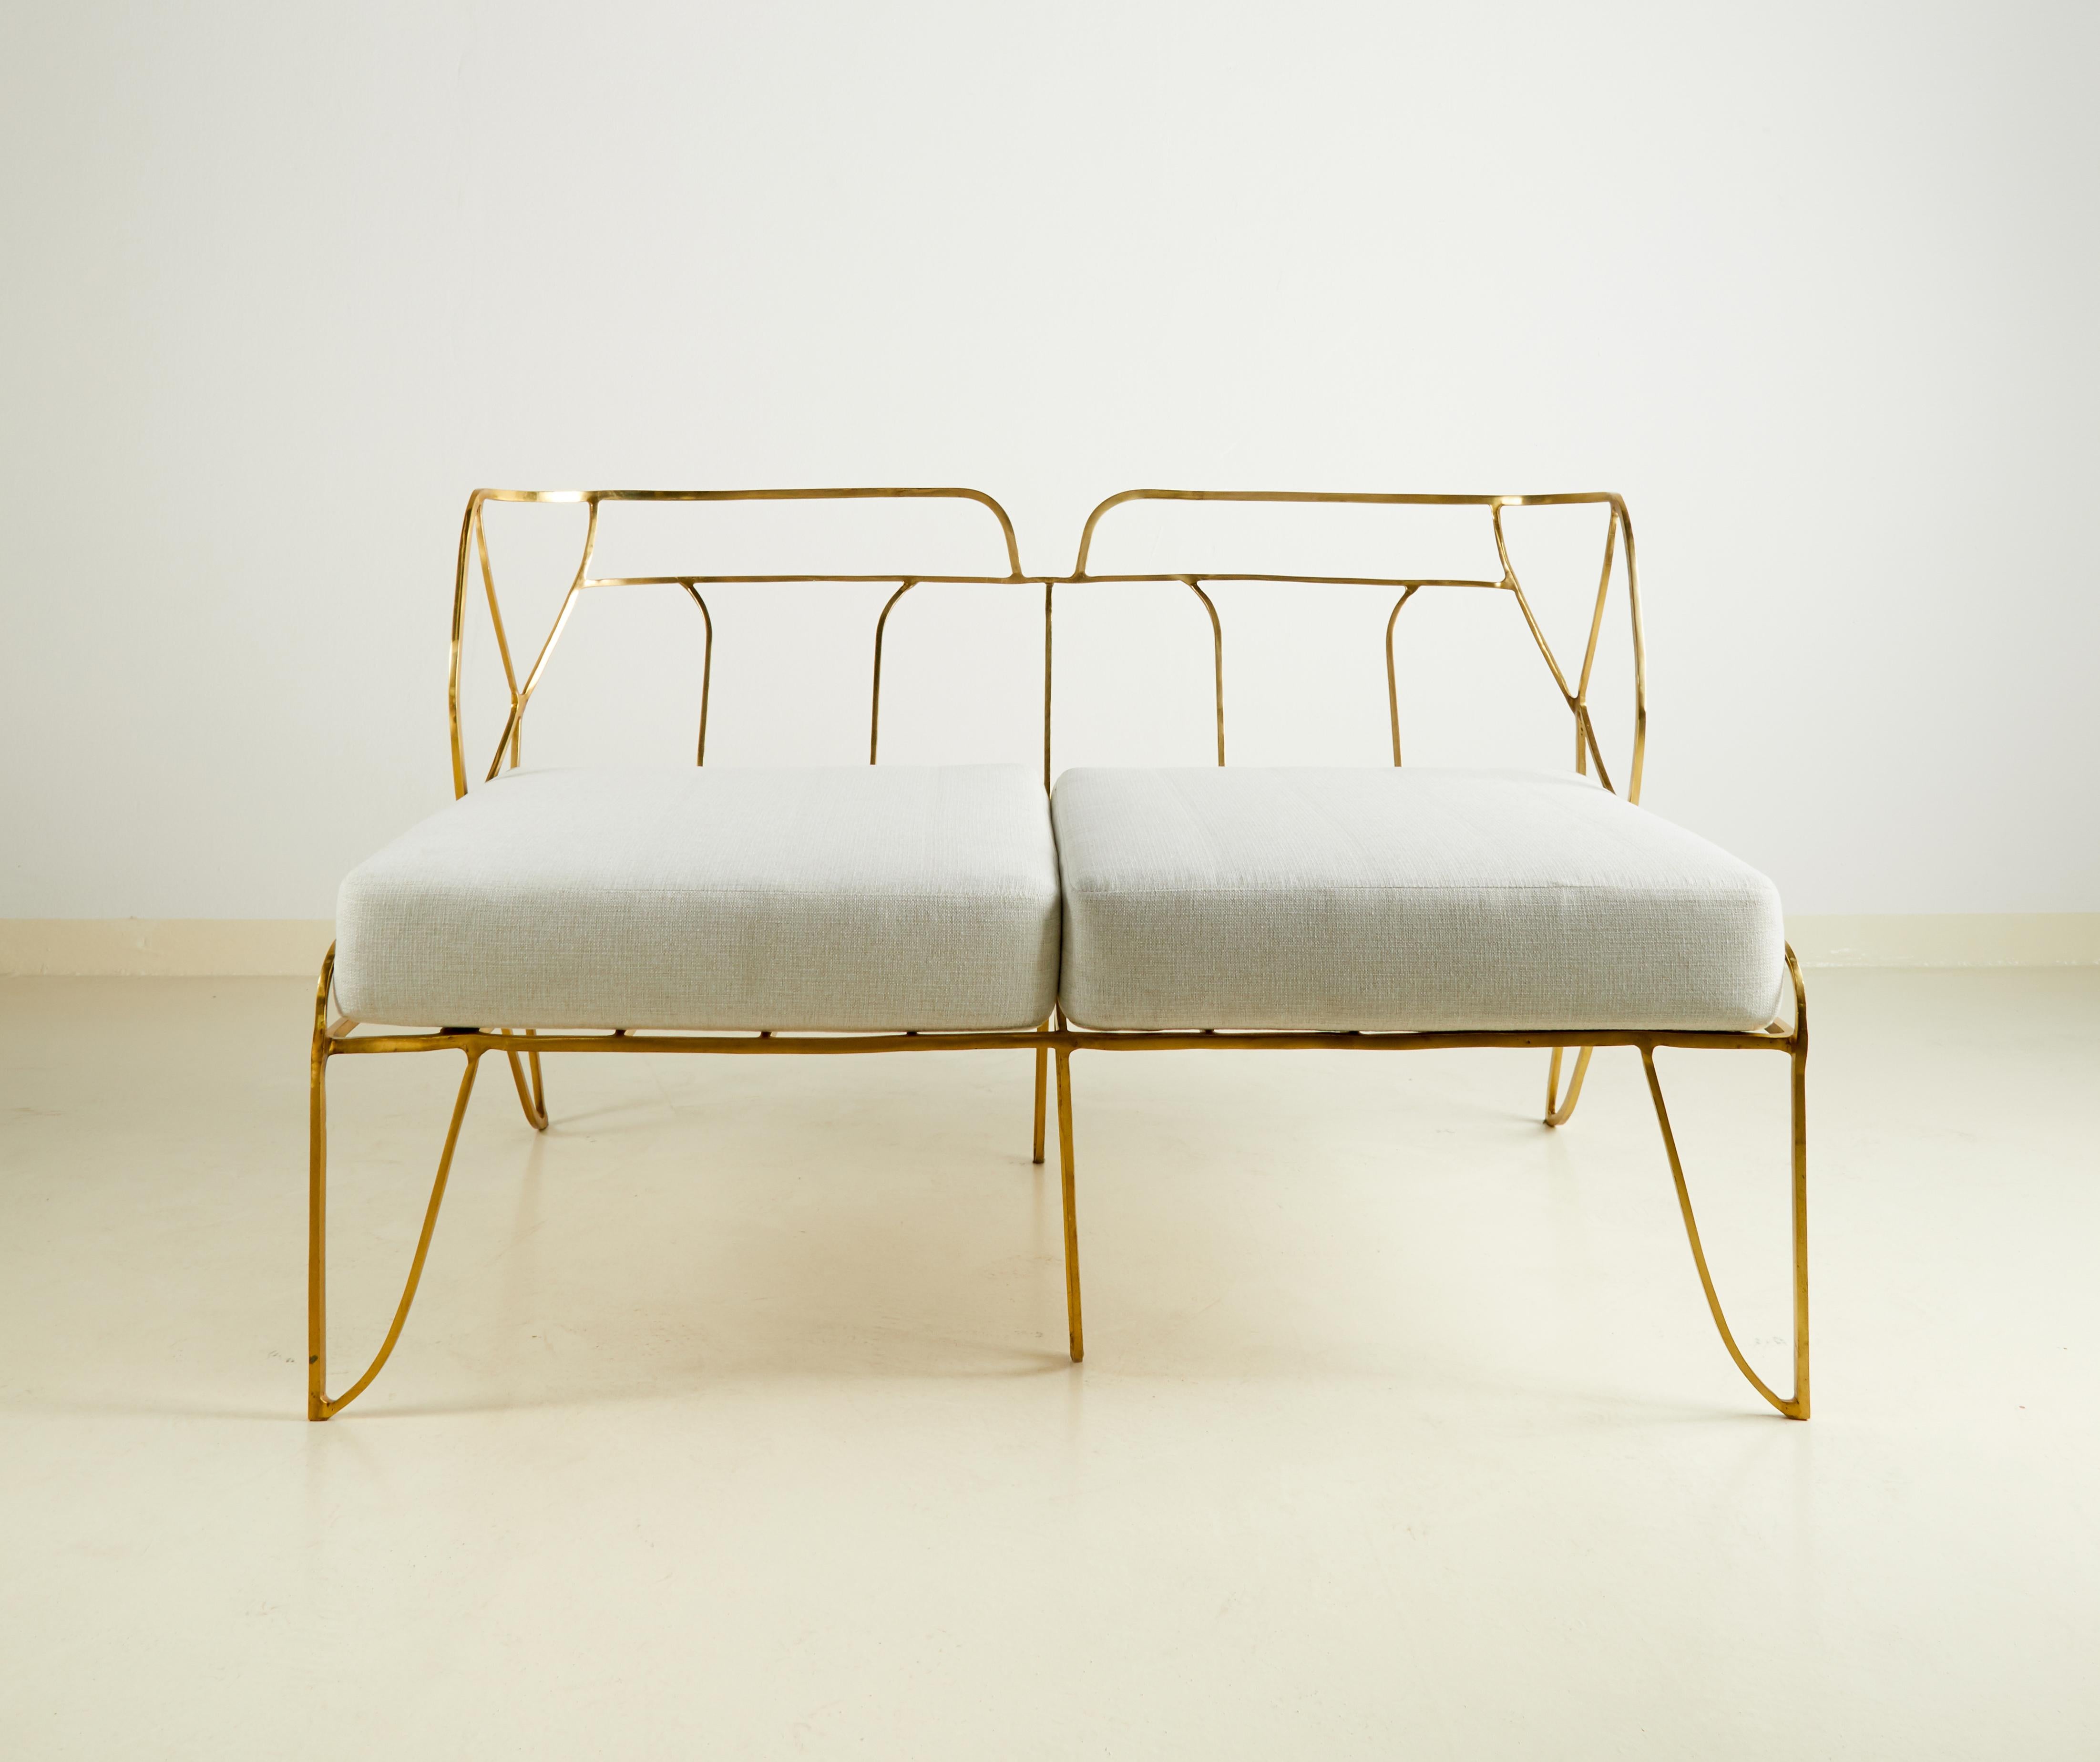 Brass hand-sculpted sofa - Misaya
Dimensions: H 75 x W 124 x L 69 cm 
Hand-sculpted brass sofa.
Made to order dimensions are possible.